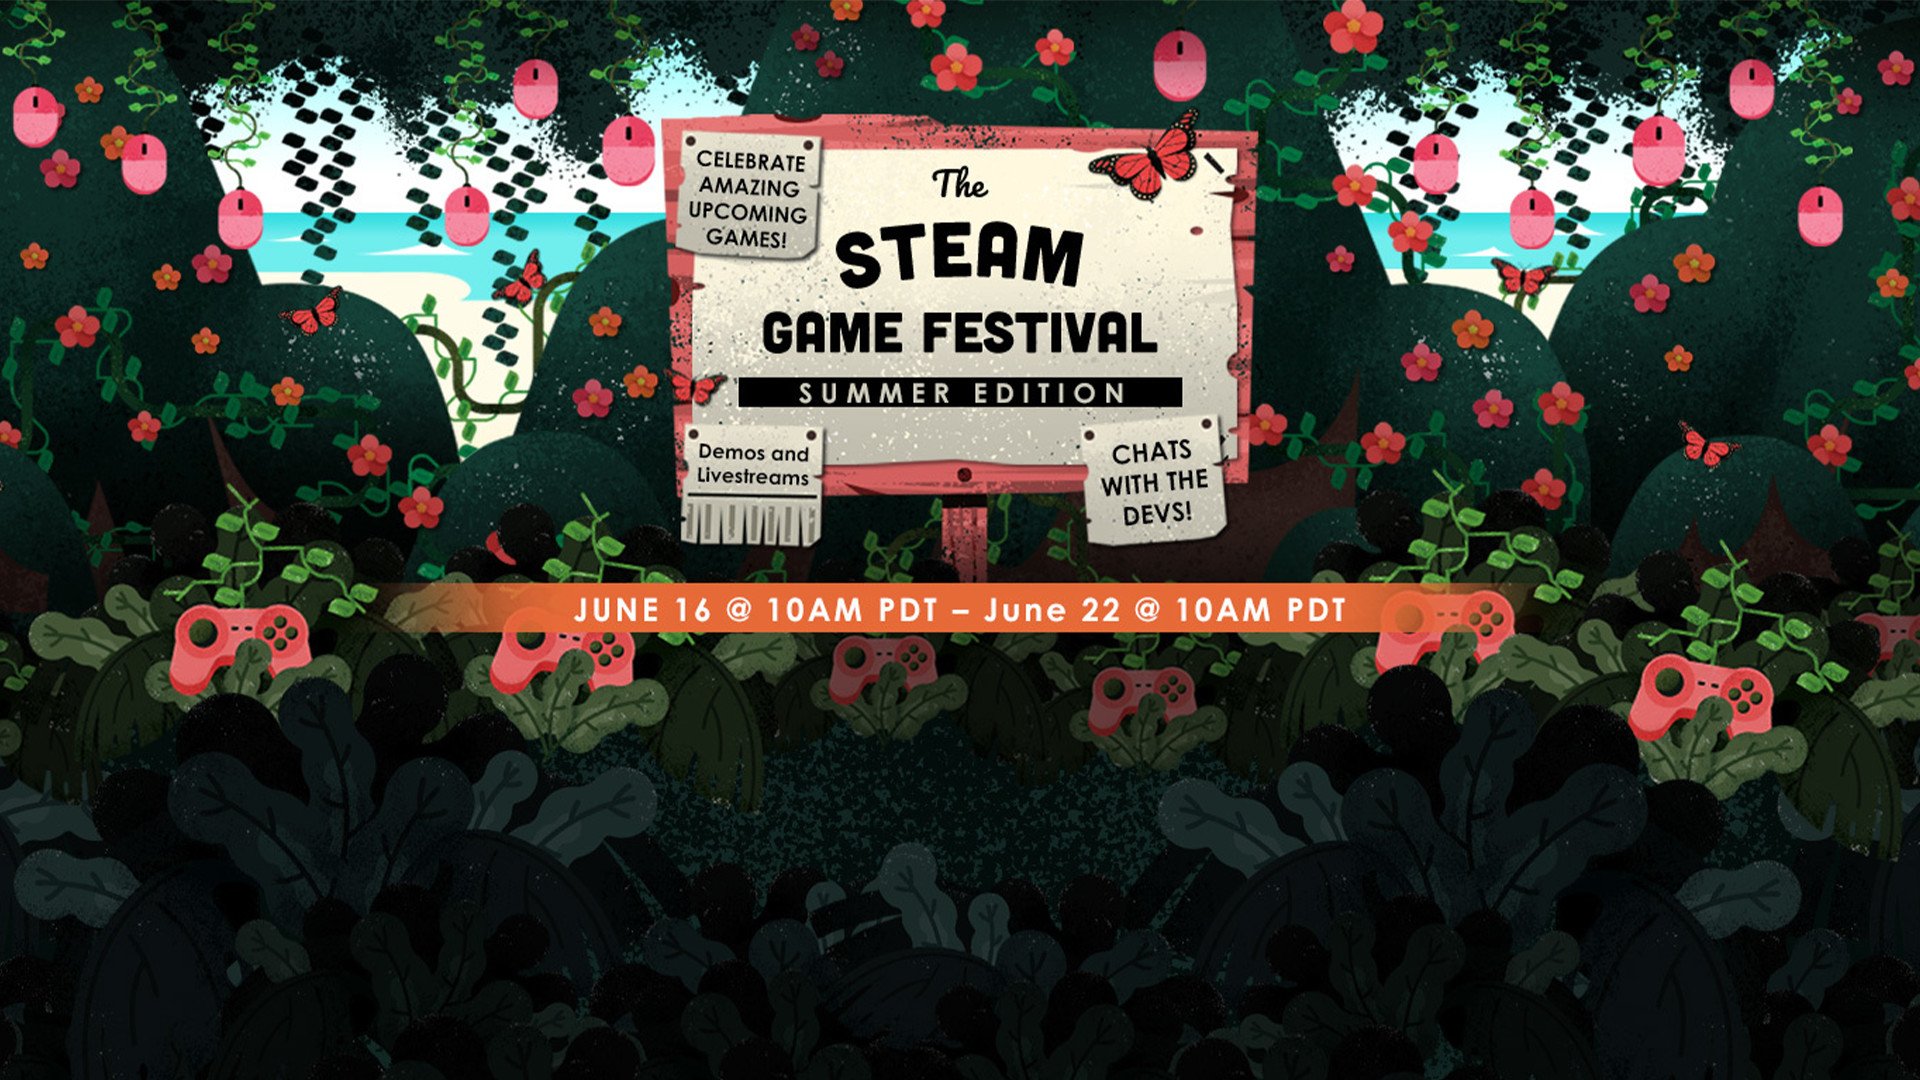 Steam Summer Festival - New Demo available June 16th!